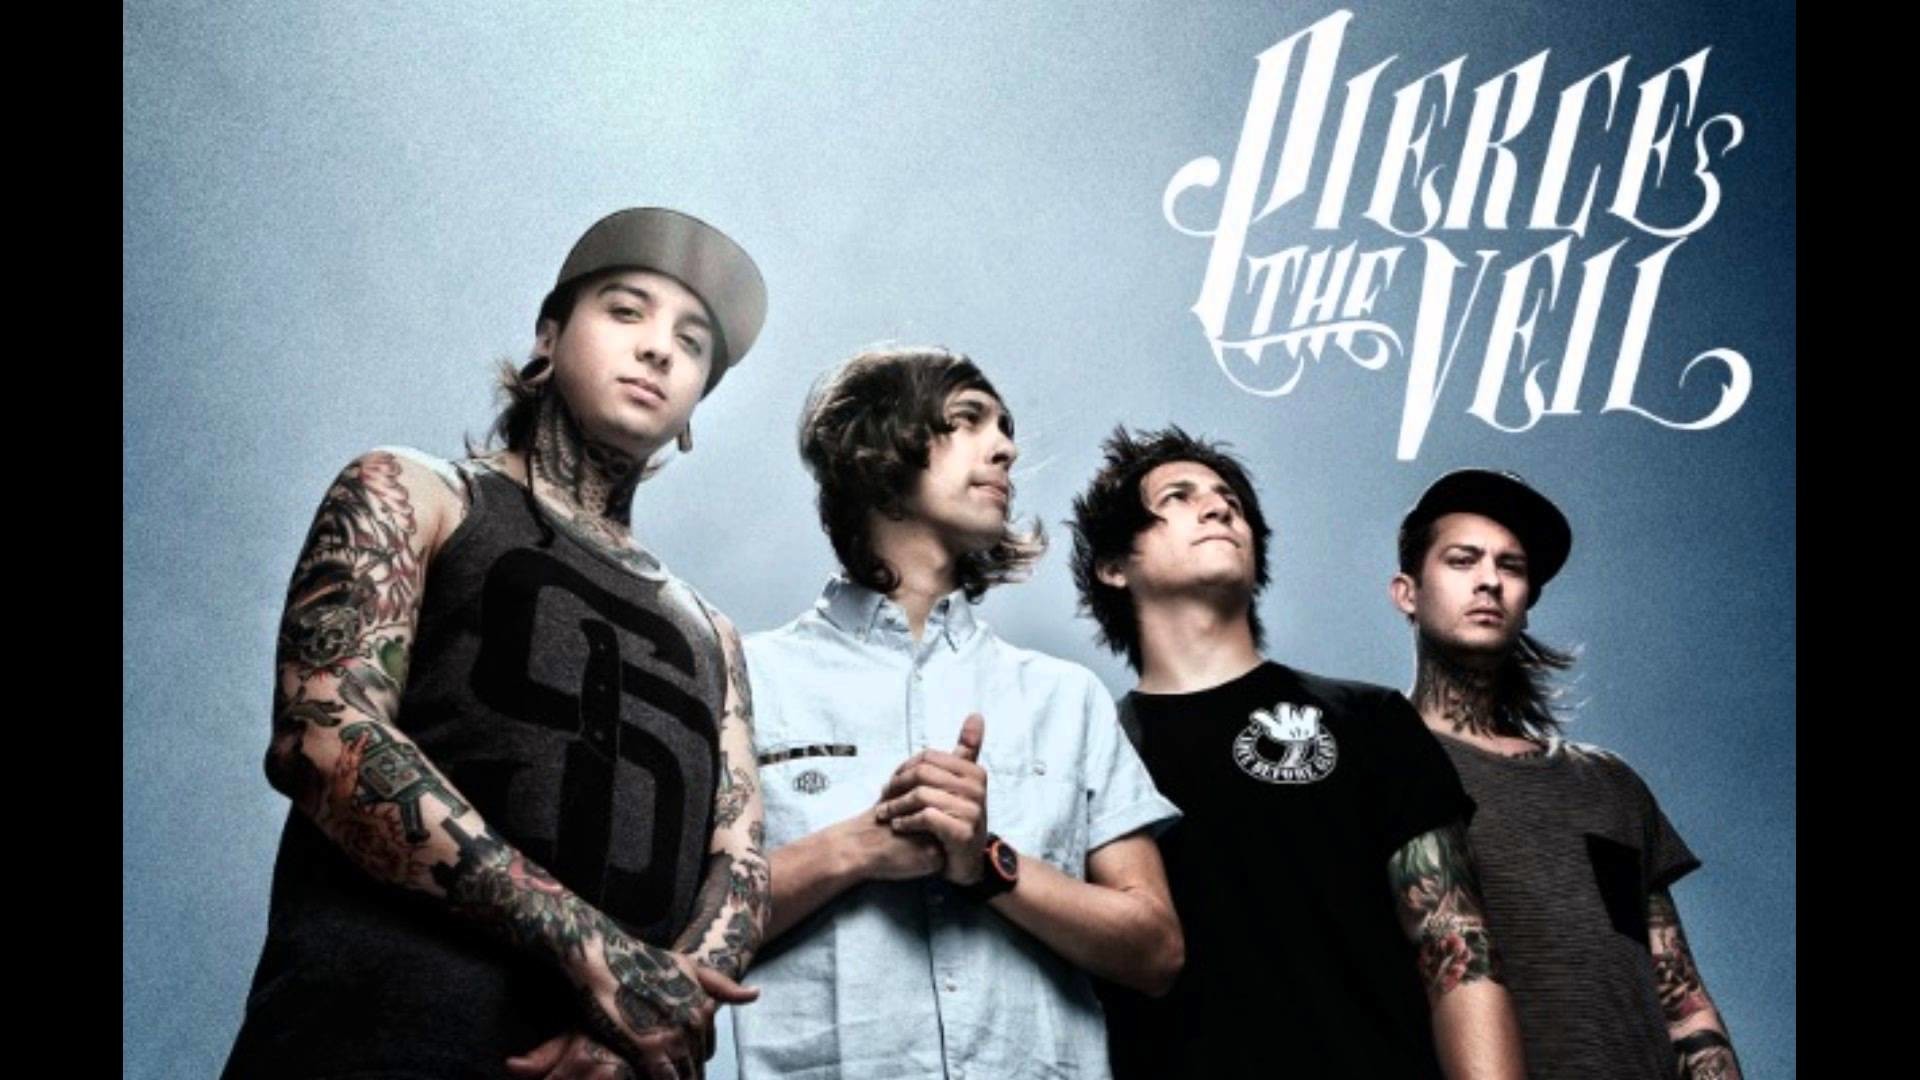 Pierce the Veil Wallpapers (80+ images)1920 x 1080